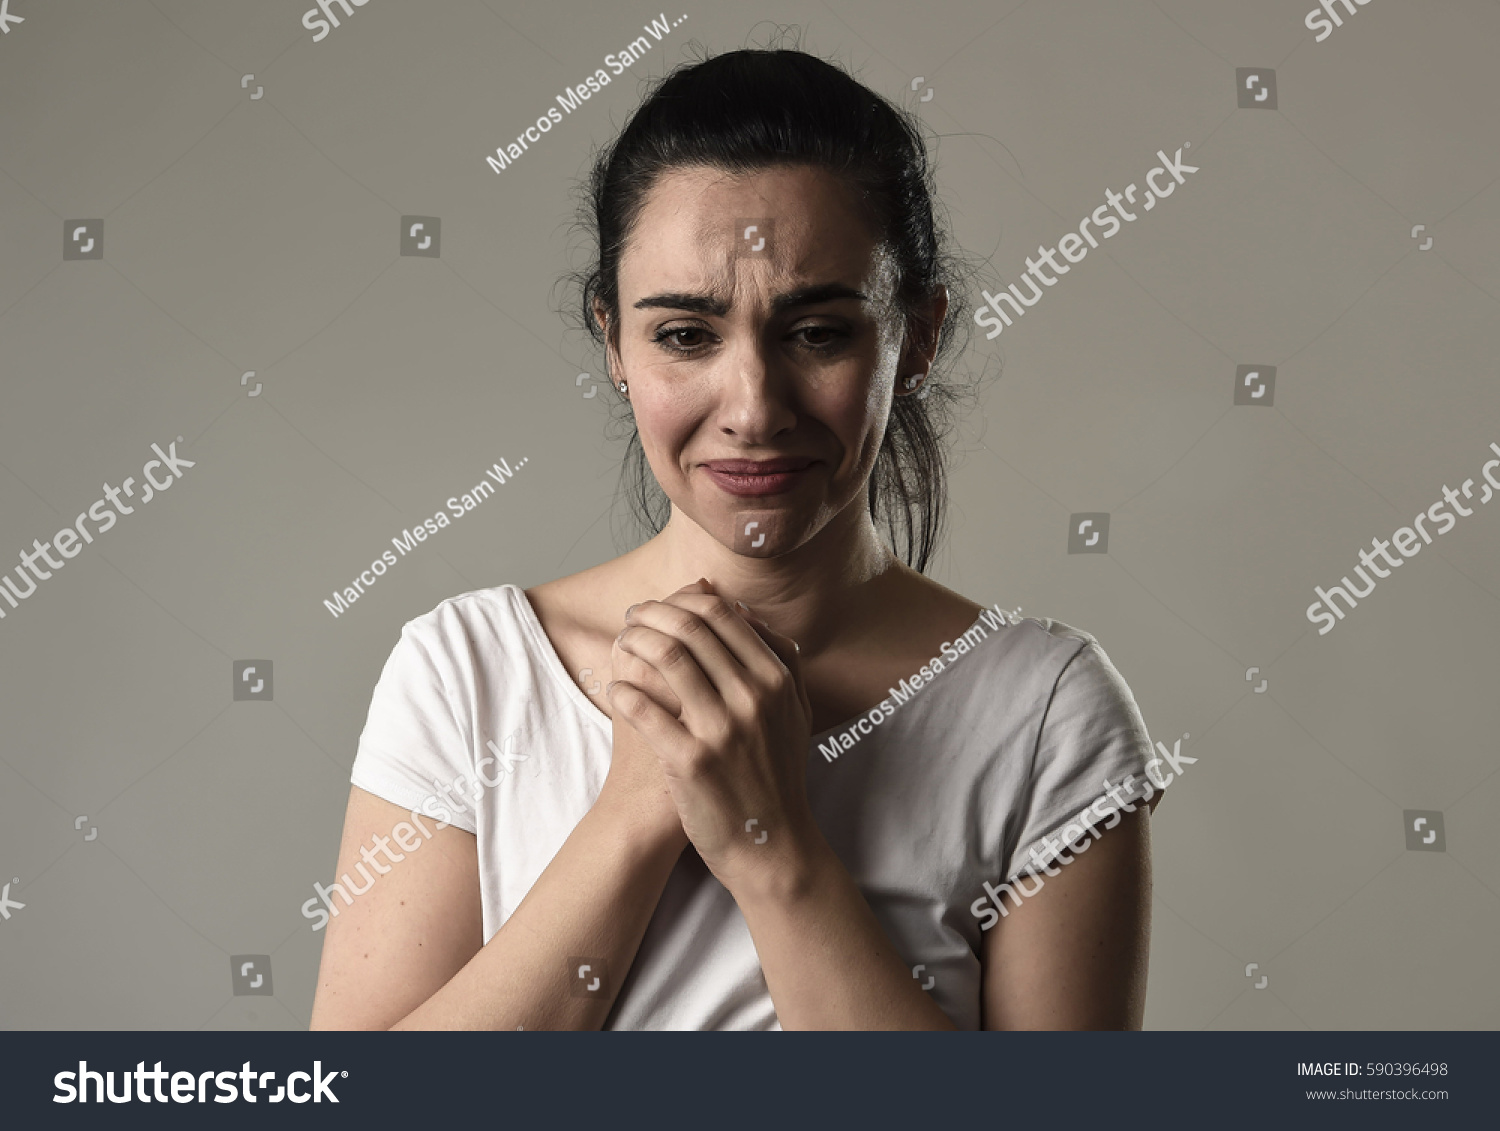 beautiful face of sad woman crying desperate and depressed with tears on her eyes suffering pain and depression isolated on grey background in sadness facial expression and emotion concept #590396498